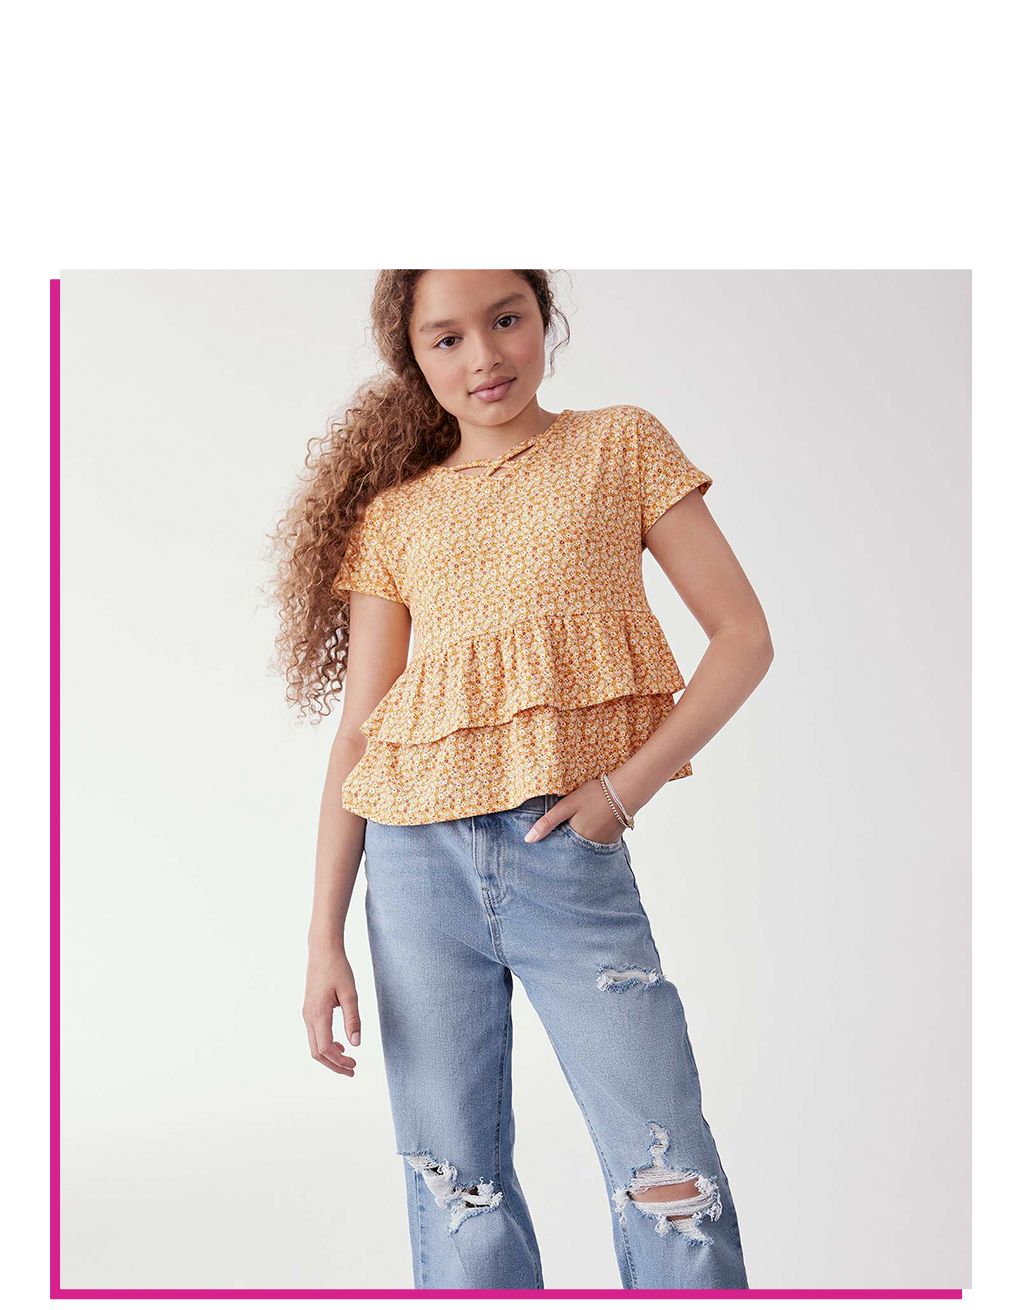 Girls Clothes | Shop Cute Clothes for Girls sizes 7-14 | maurices